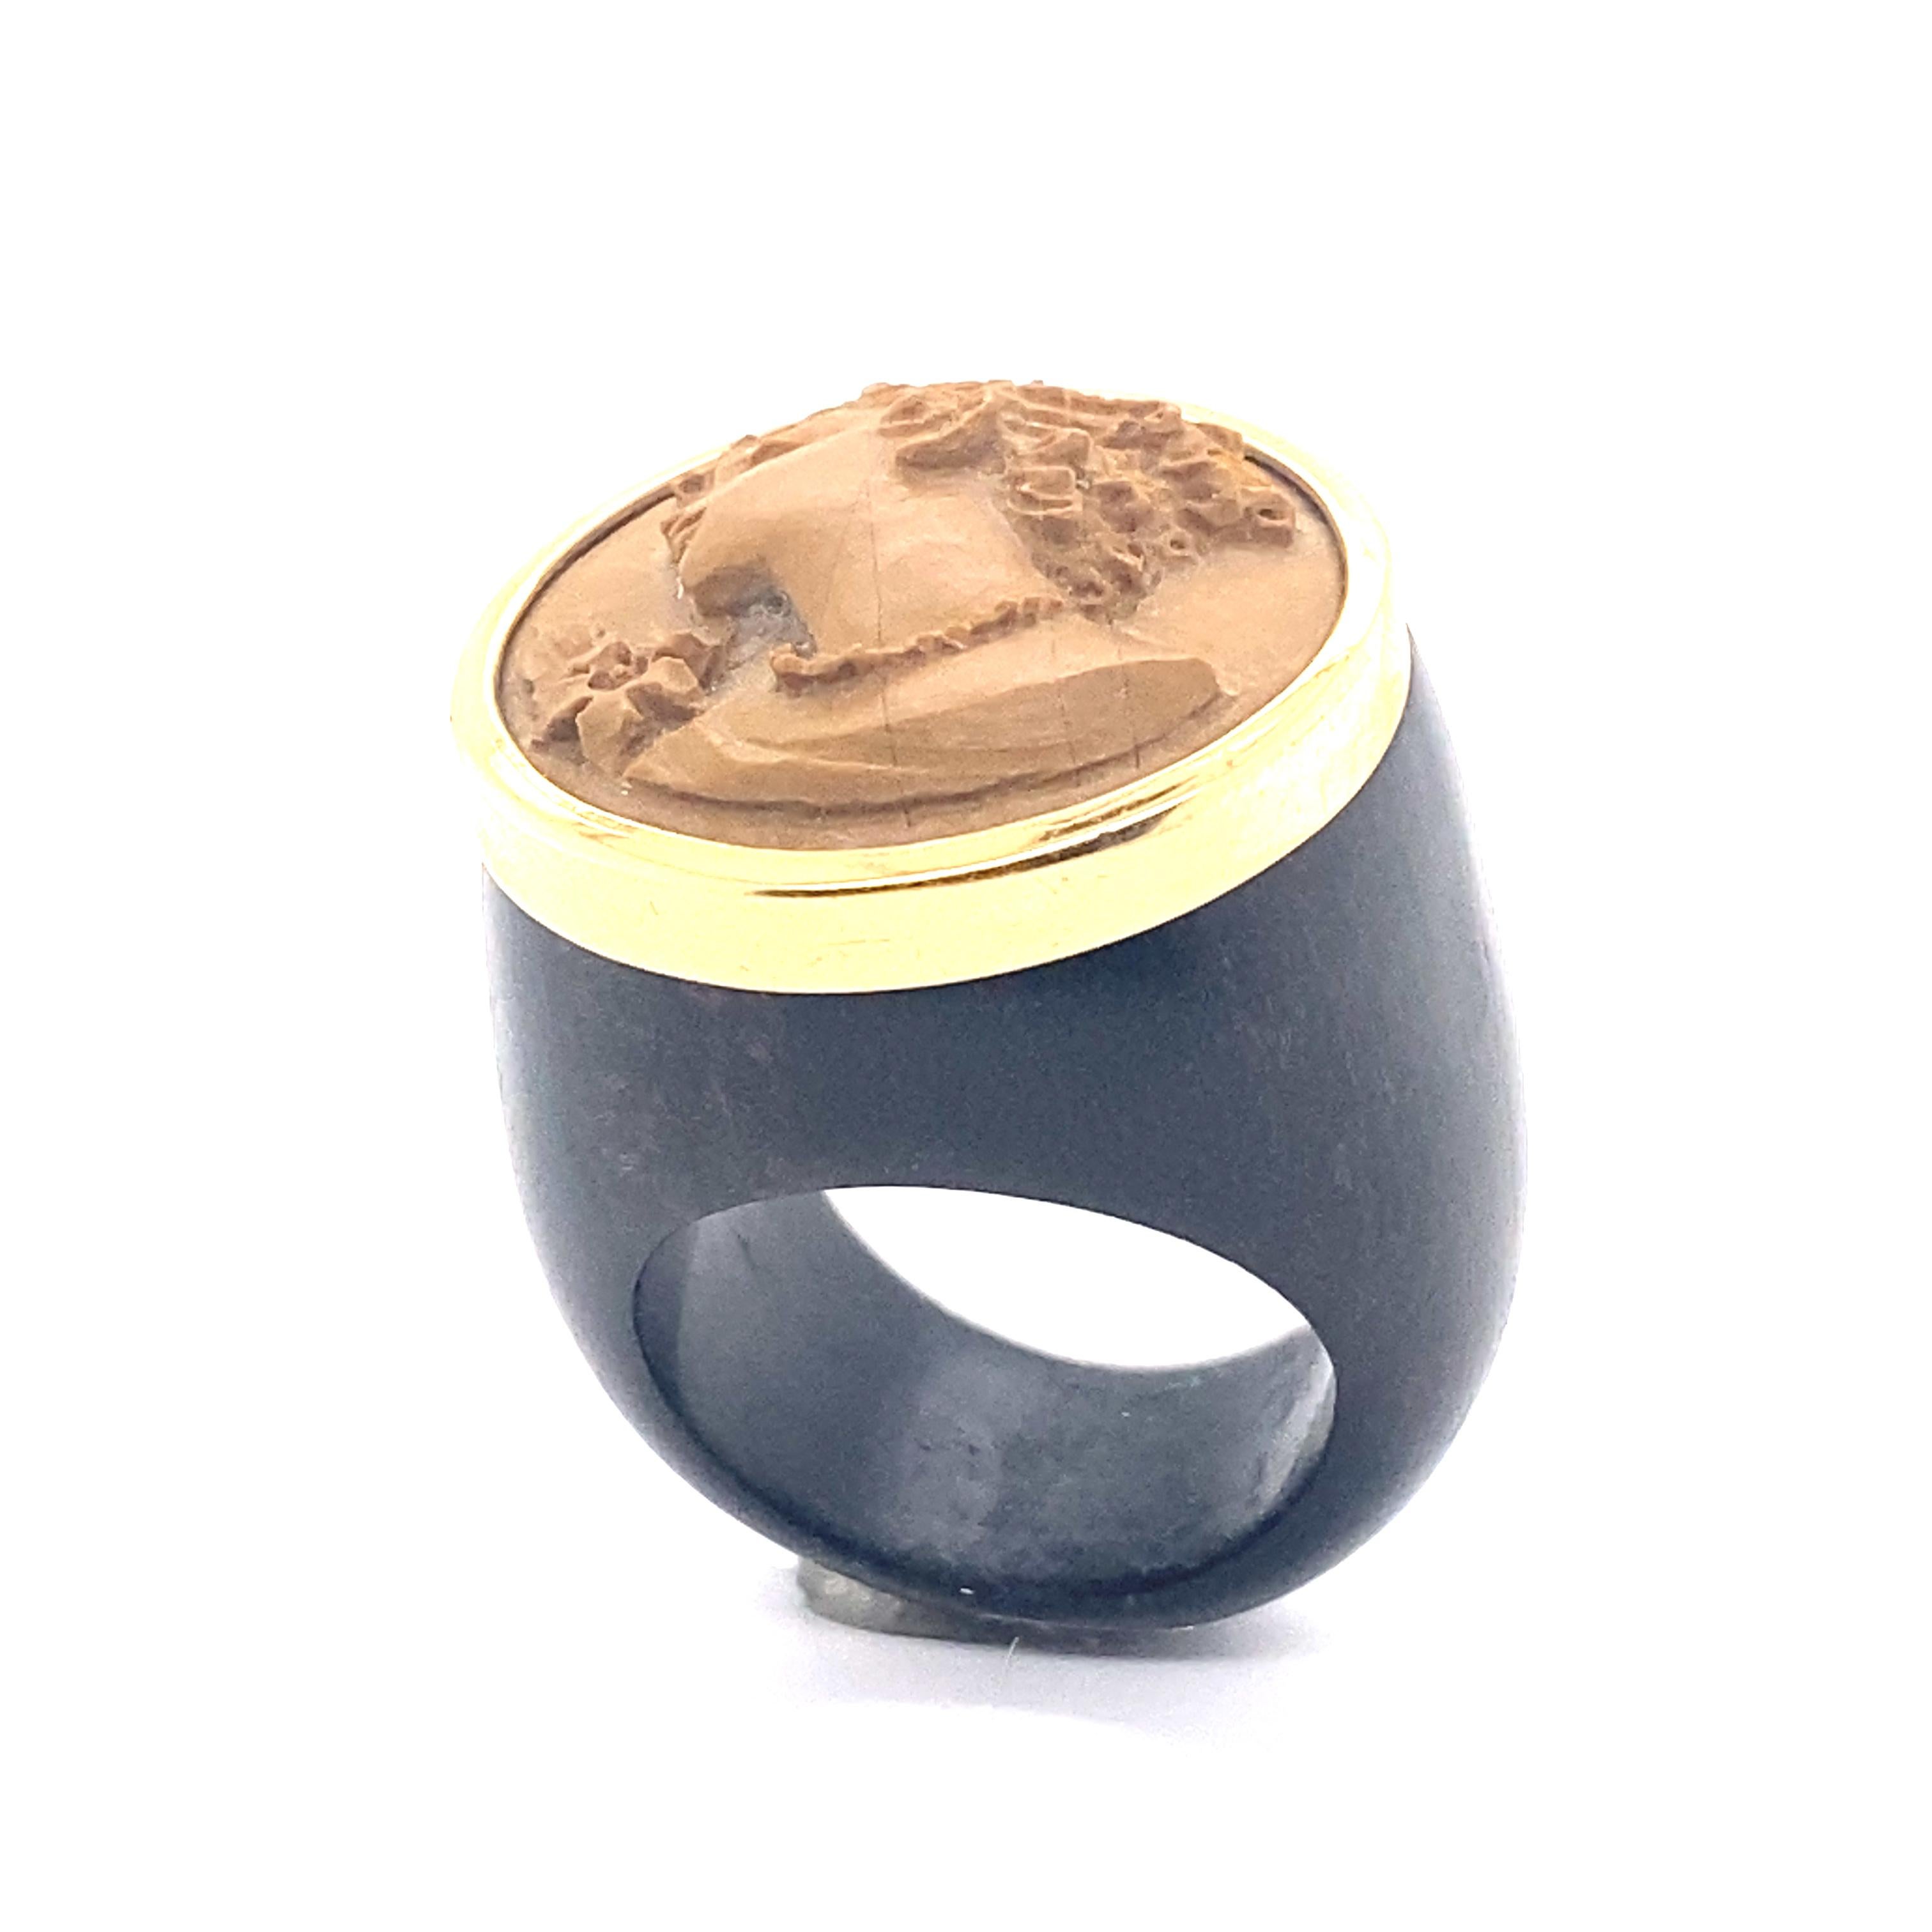 Exceptional Yellow Gold Wood and Cameo Ring.
Yellow Gold 18 Carat
Wood
Cameo 